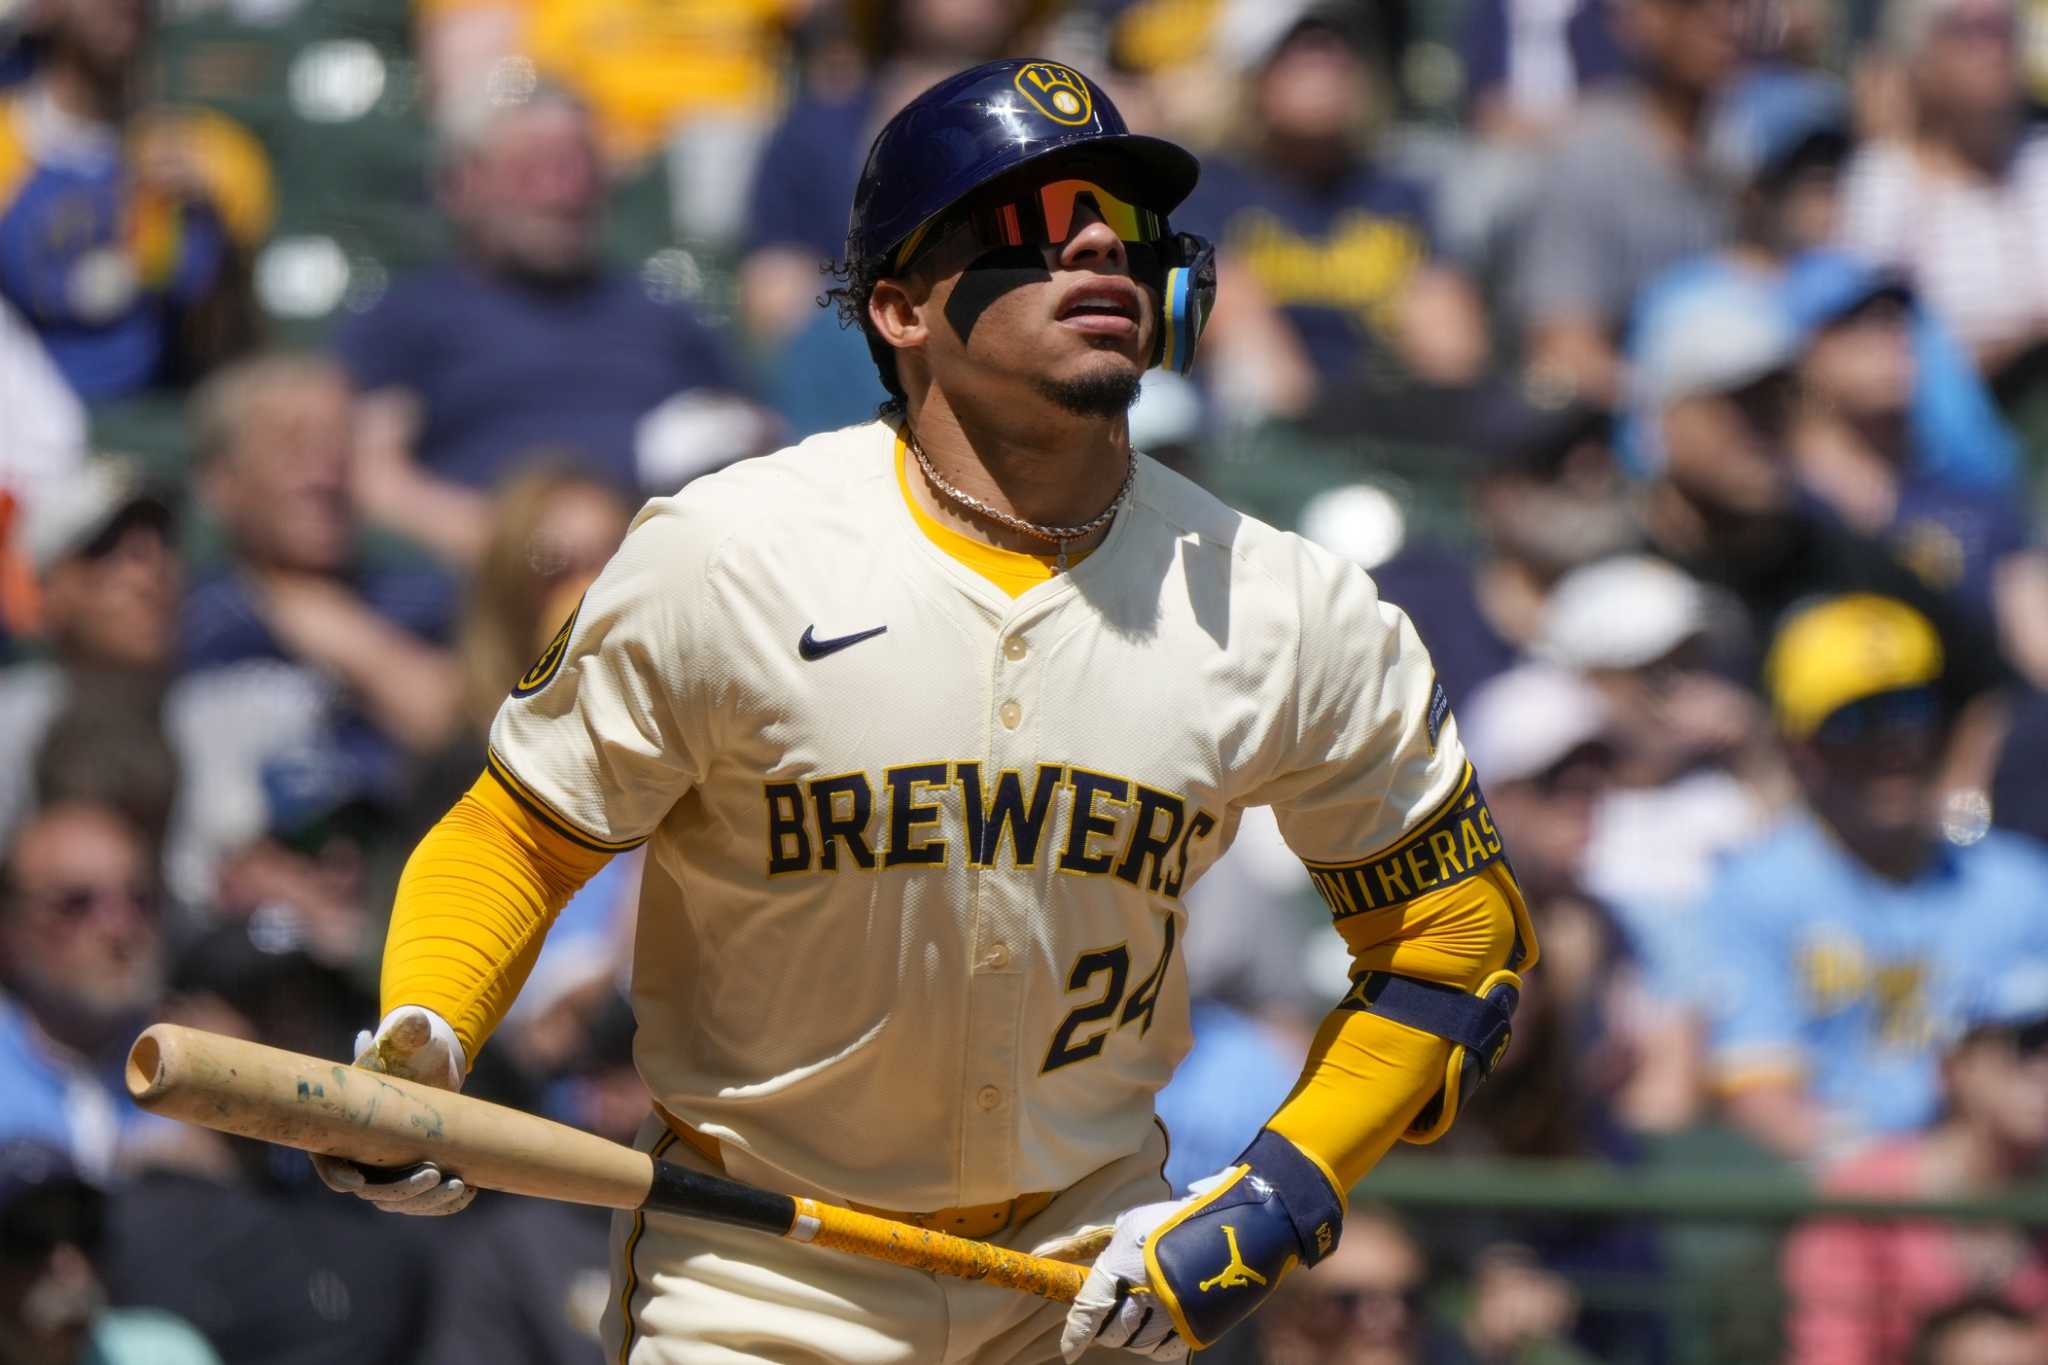 William Contreras leads the way as Brewers hit 5 homers off Martín Pérez in 10-2 win over Pirates